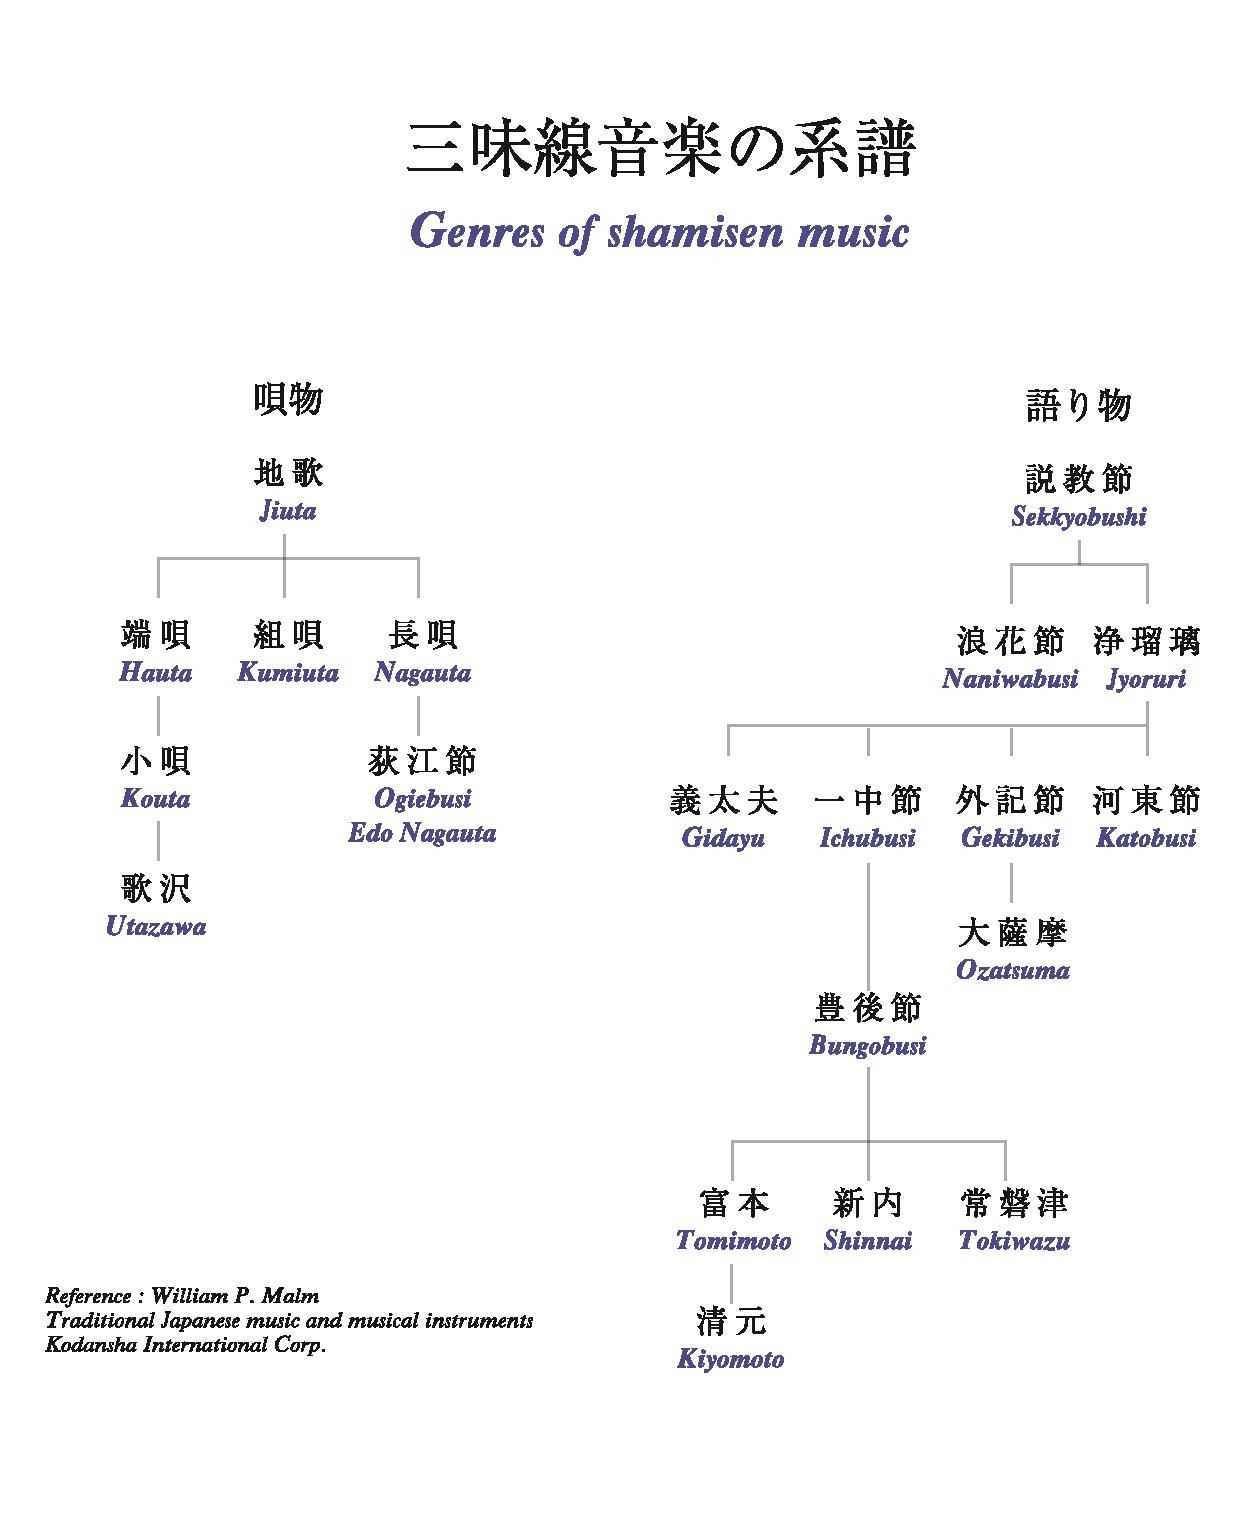 A chart showing the relationship between the different genres of shamisen.